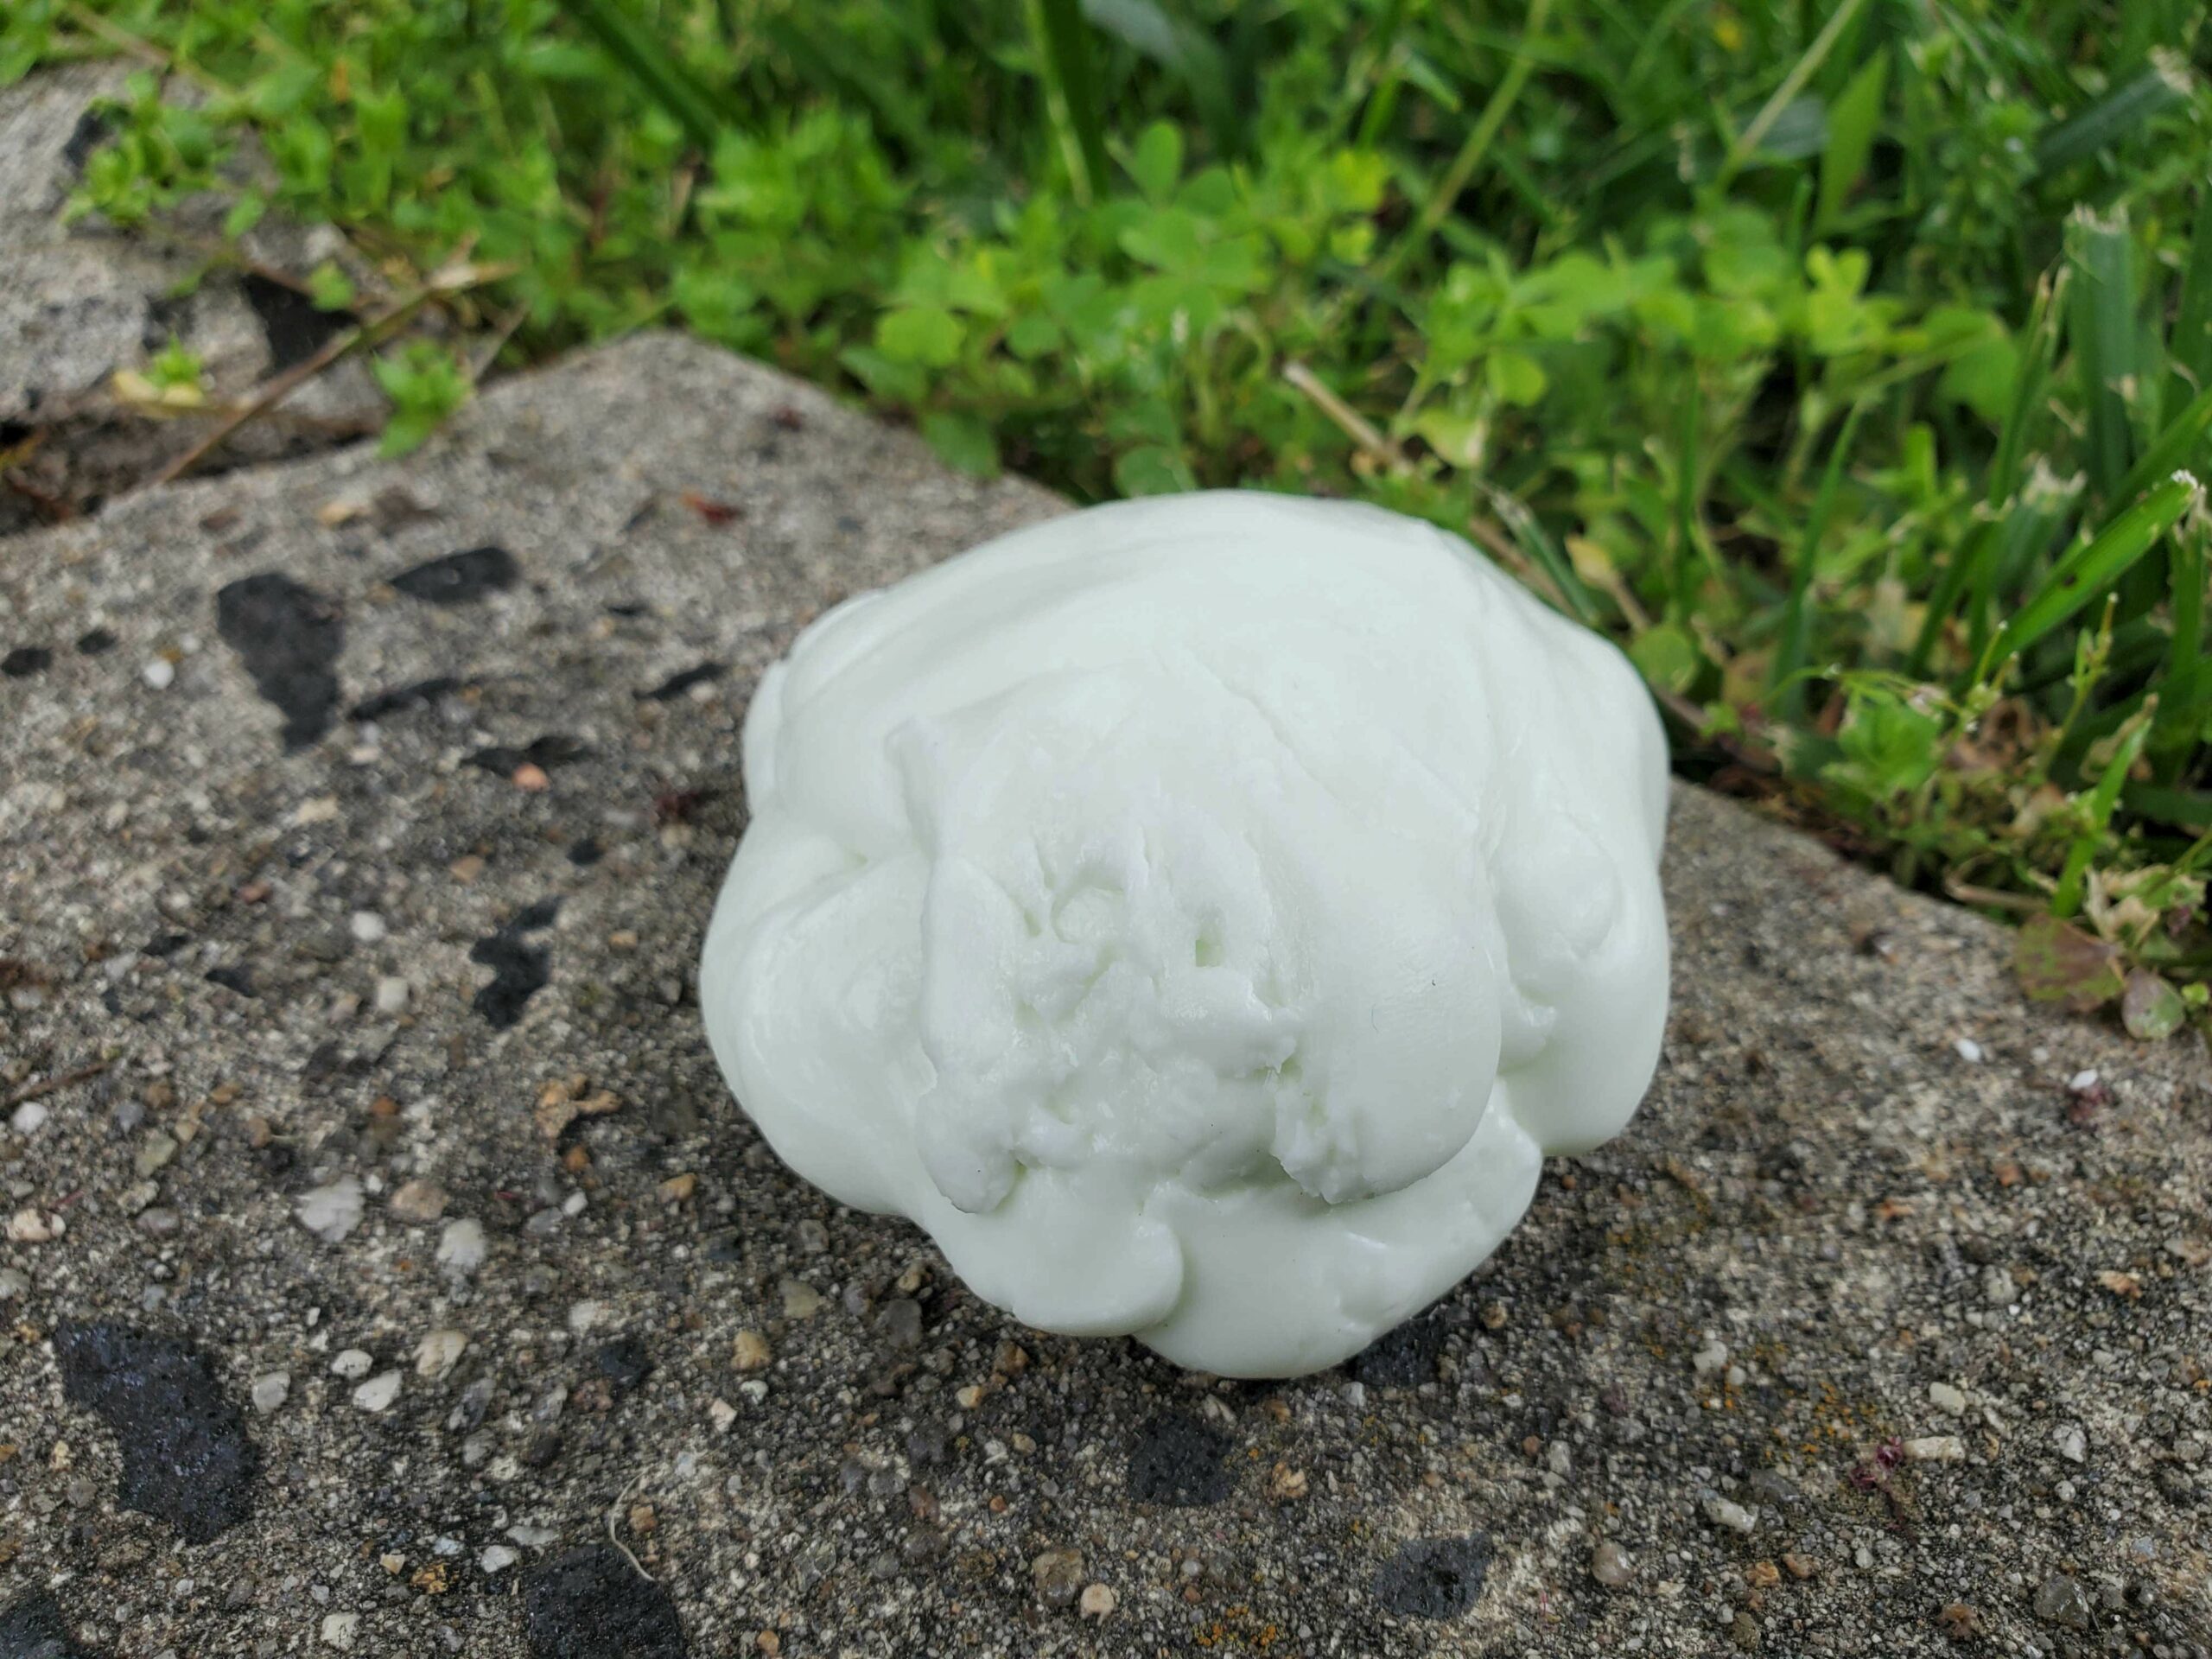 A ball of homemade Silly Putty